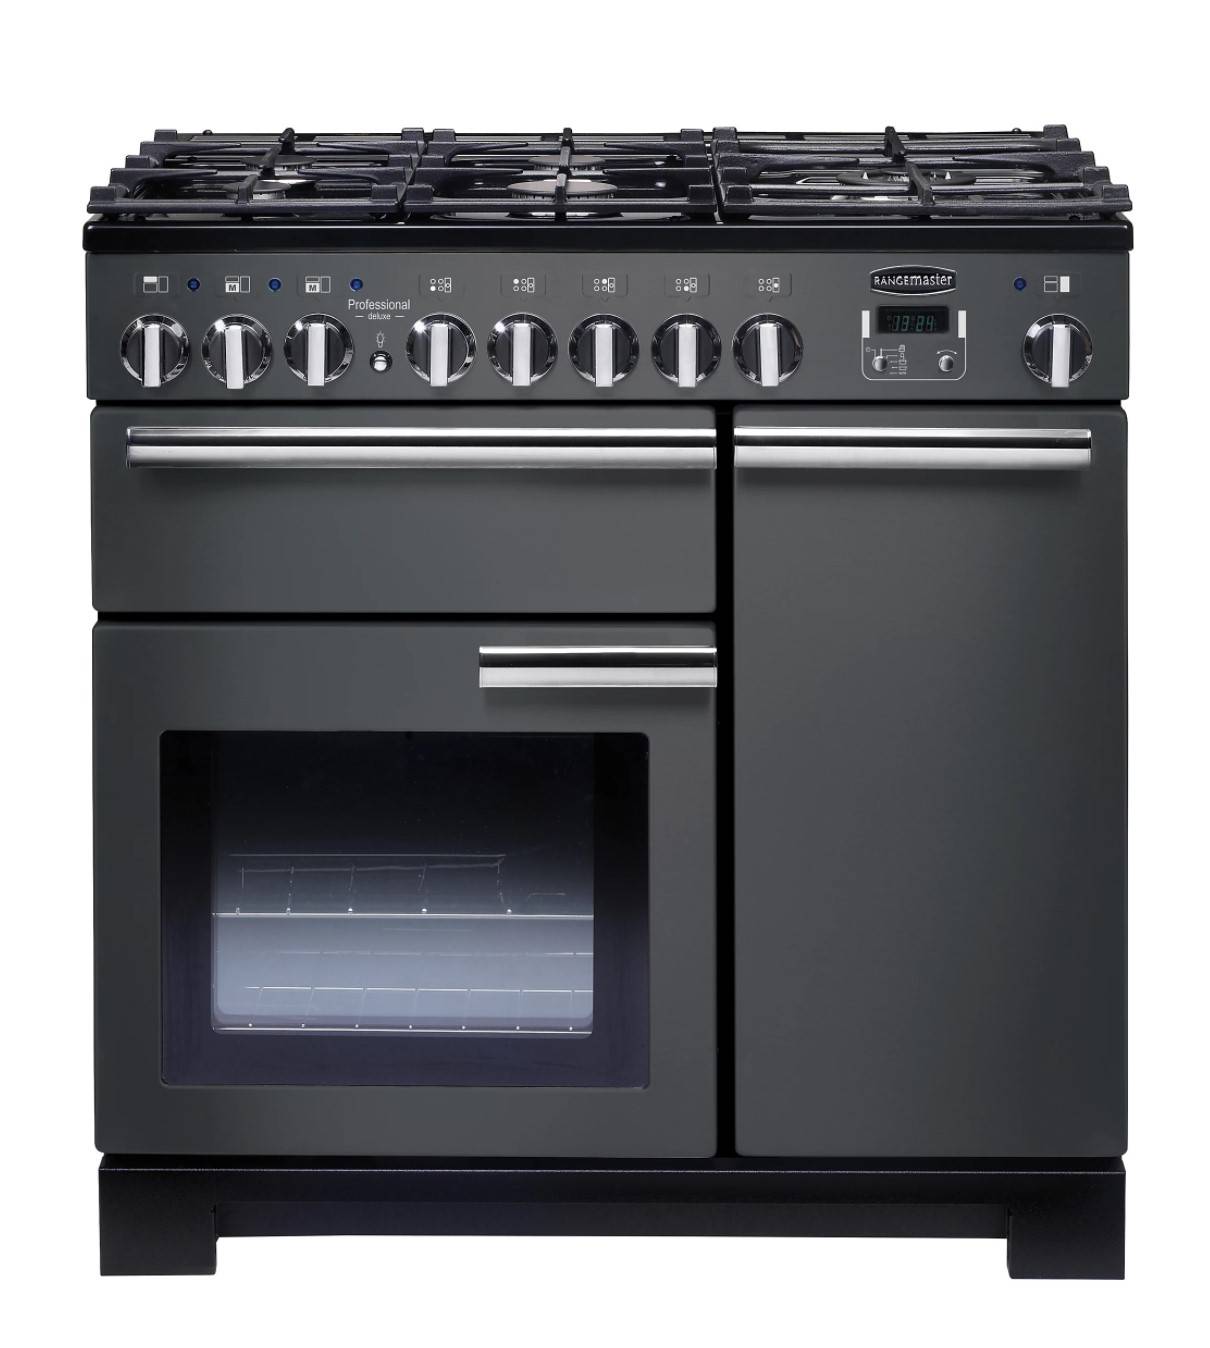 Deluxe cooker with Gas Hob Freestanding PDL90DFFSLC Grade A